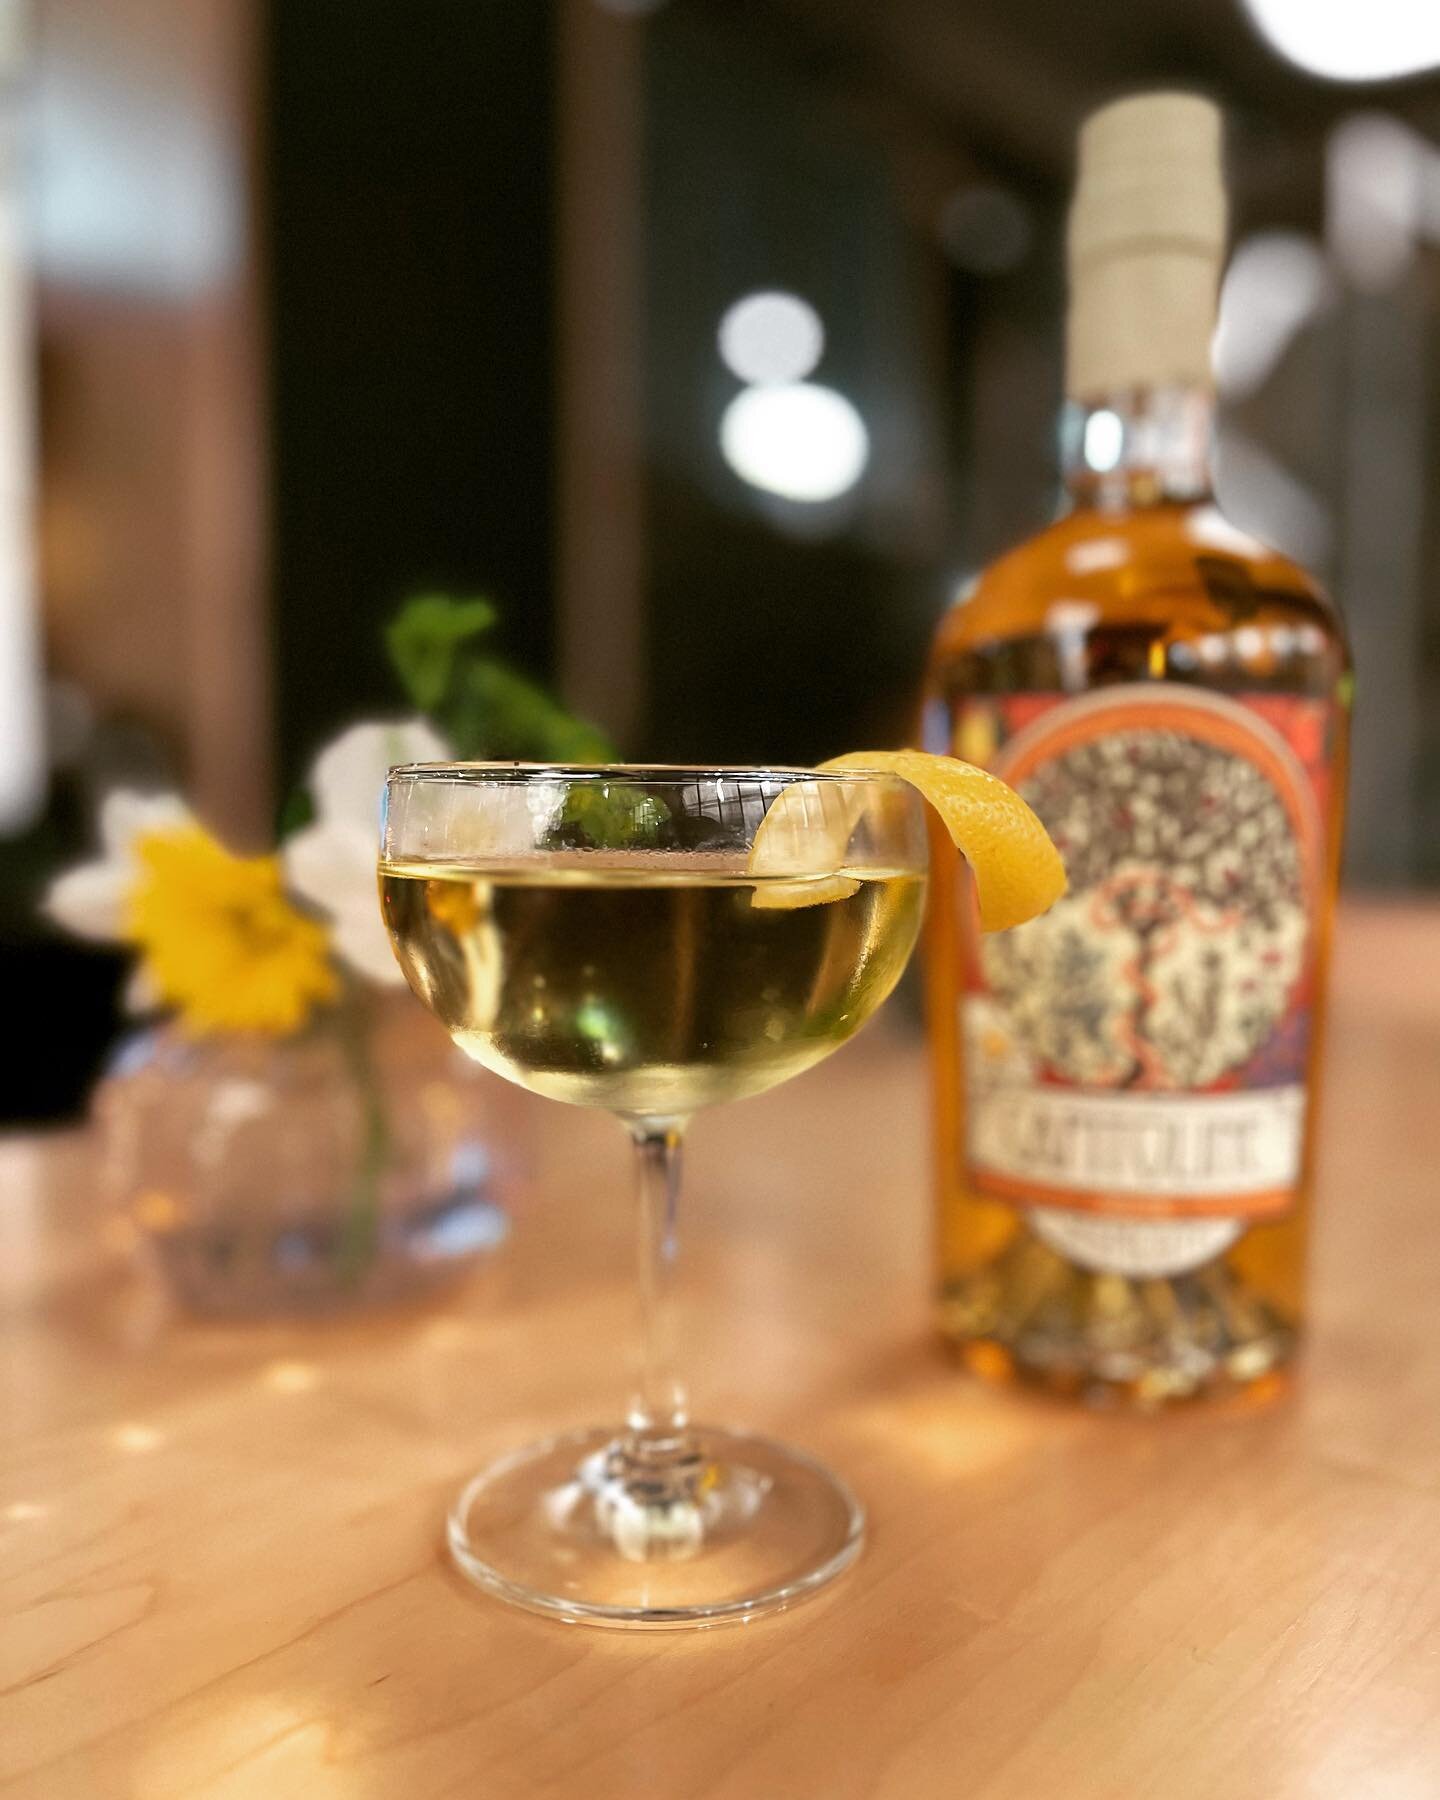 The joy of a wet martini&hellip;.50/50 for us, @capitoline_dc White Vermouth + London Dry + orange 🍊 bitters, perfectly ice cold by our friends @barspero 🤍Can&rsquo;t think of a better way to start such a marvelous meal🍸How do you #martini?